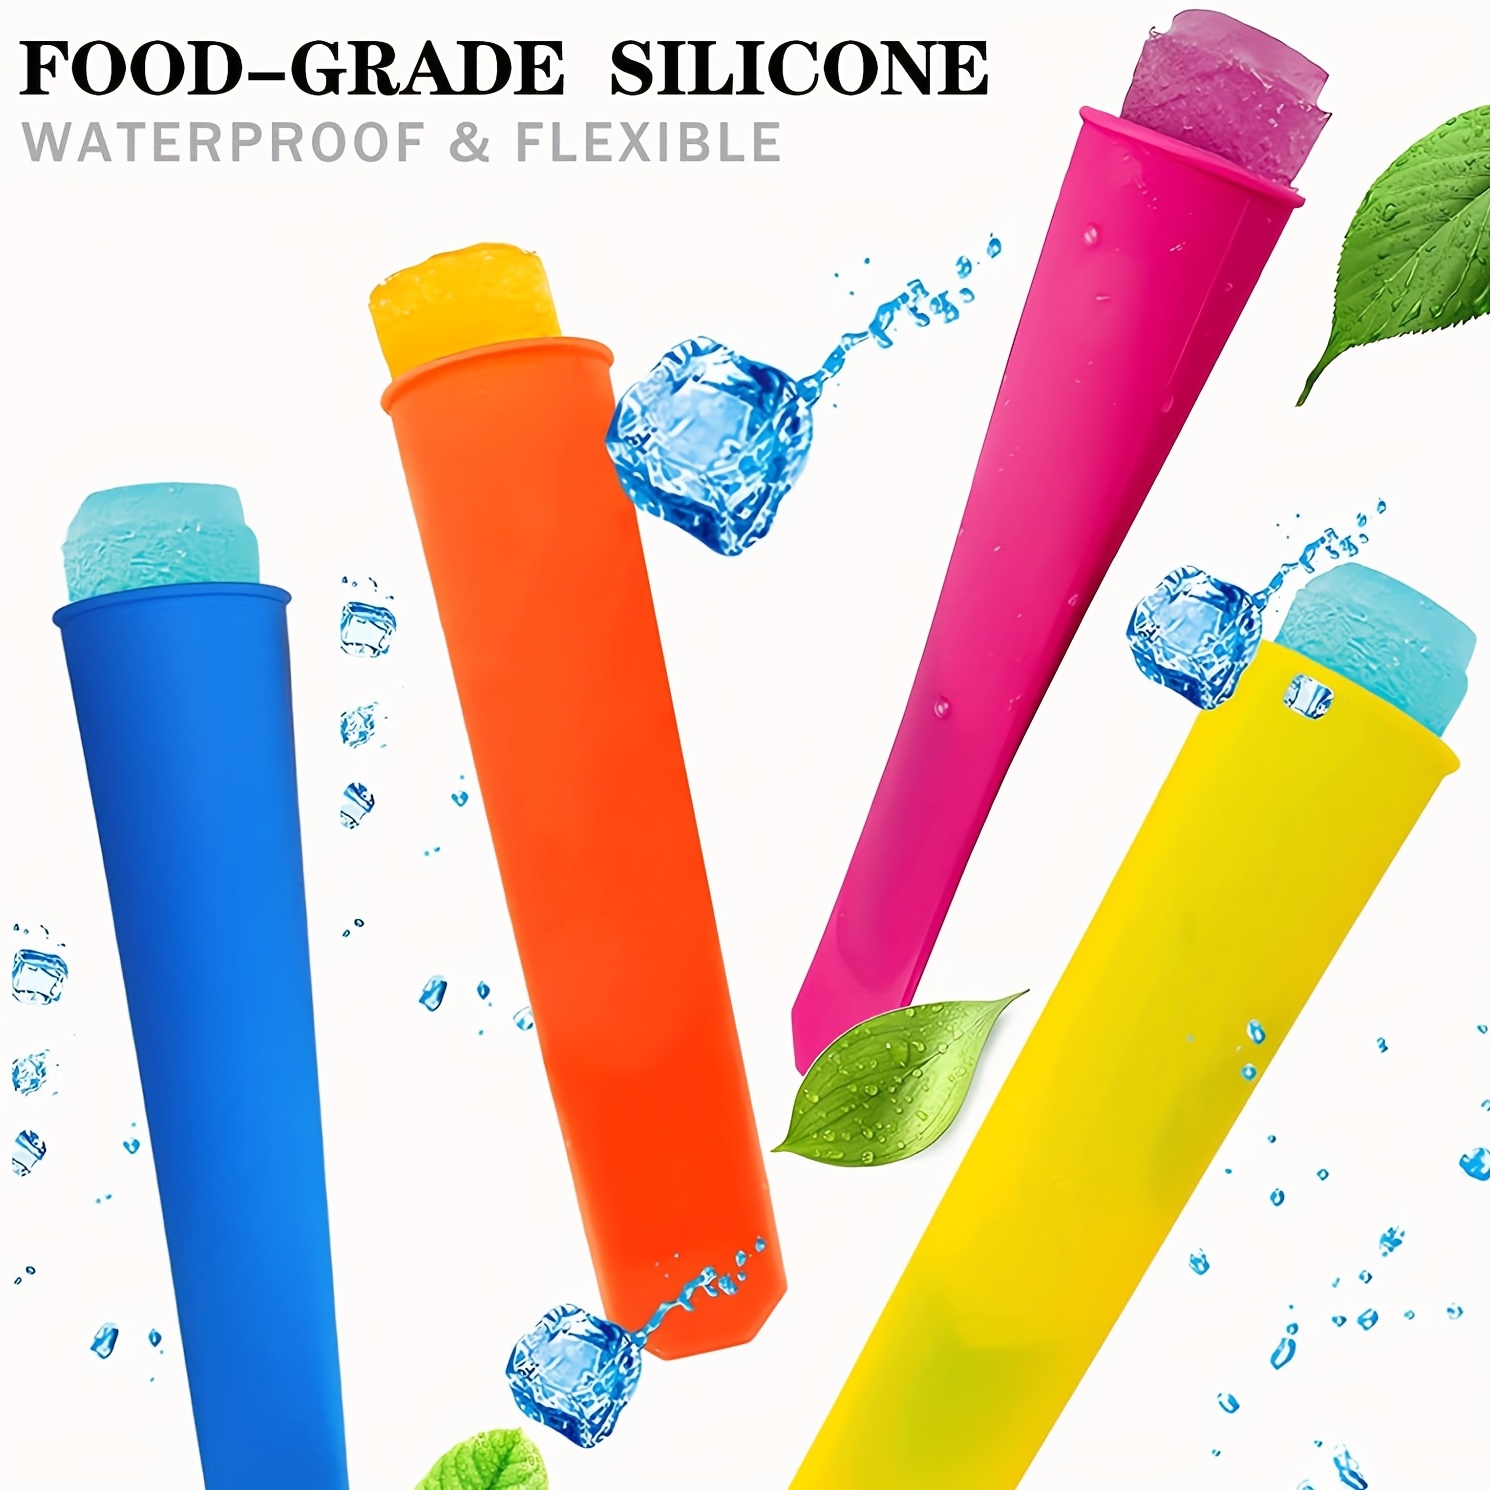 Silicone Popsicle Molds, 4 Pack Ice Cream Mold Reusable Soft